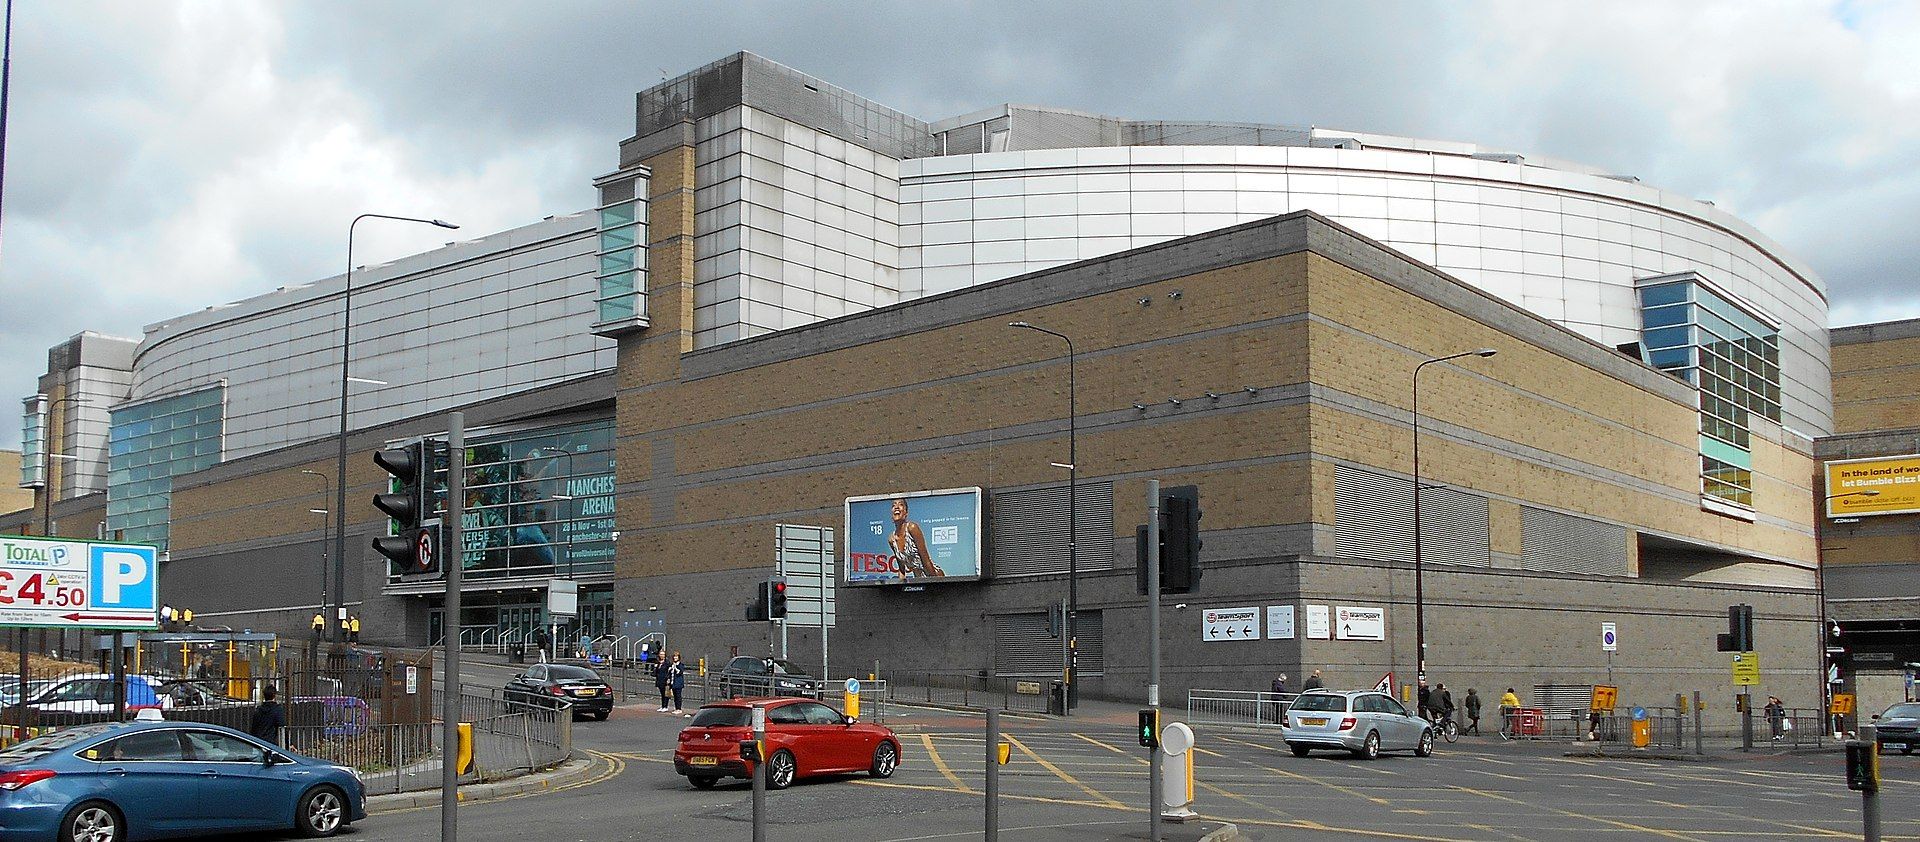 The Manchester Arena